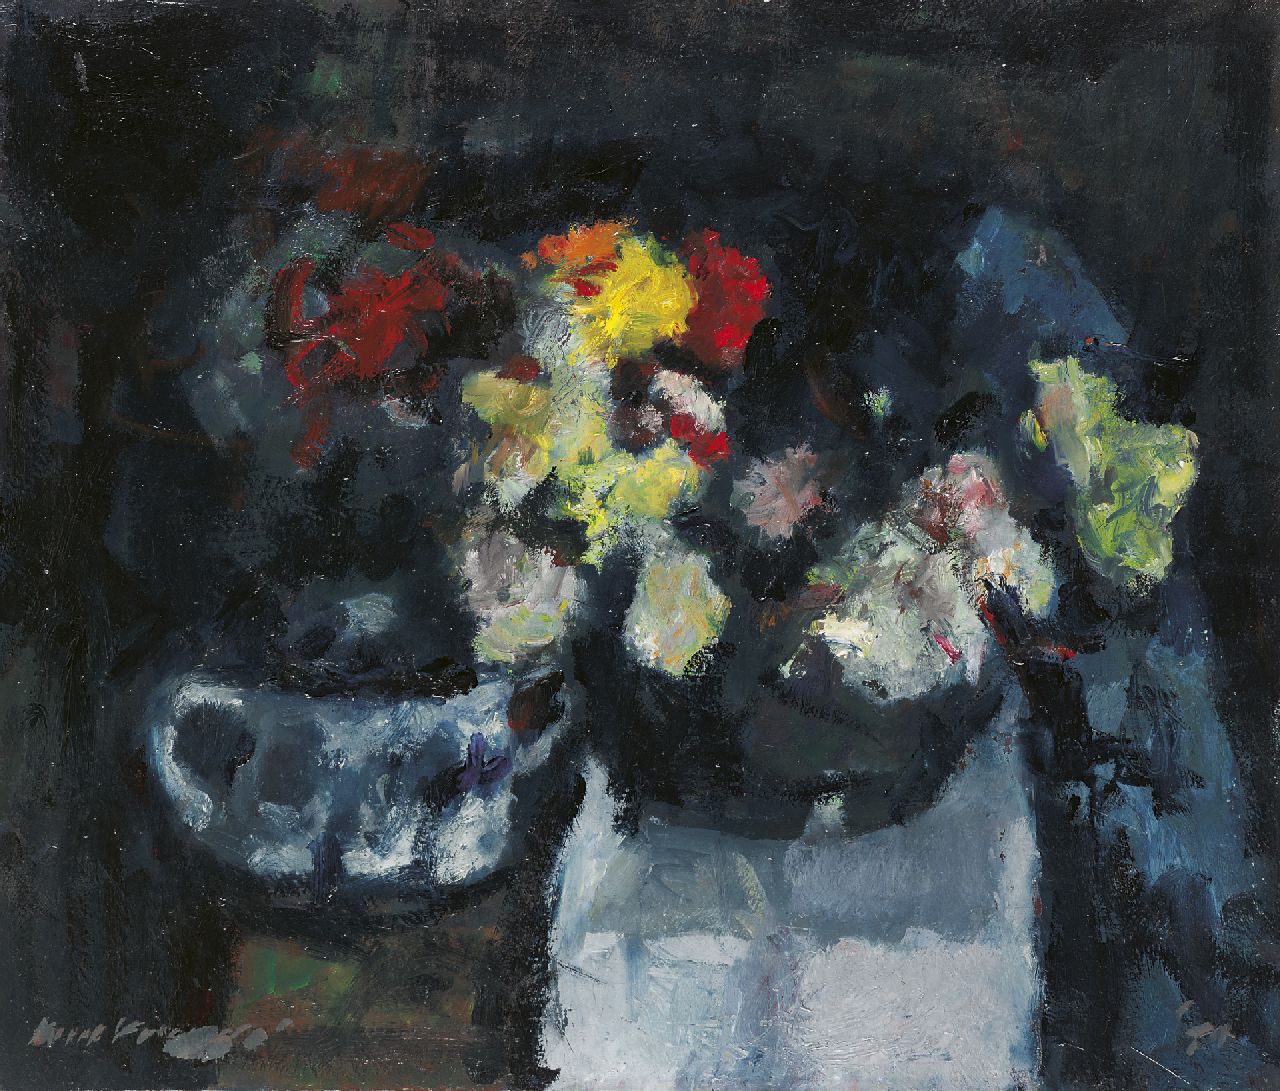 Verwey K.  | Kees Verwey | Paintings offered for sale | Flower still life, oil on canvas 60.2 x 70.5 cm, signed l.l